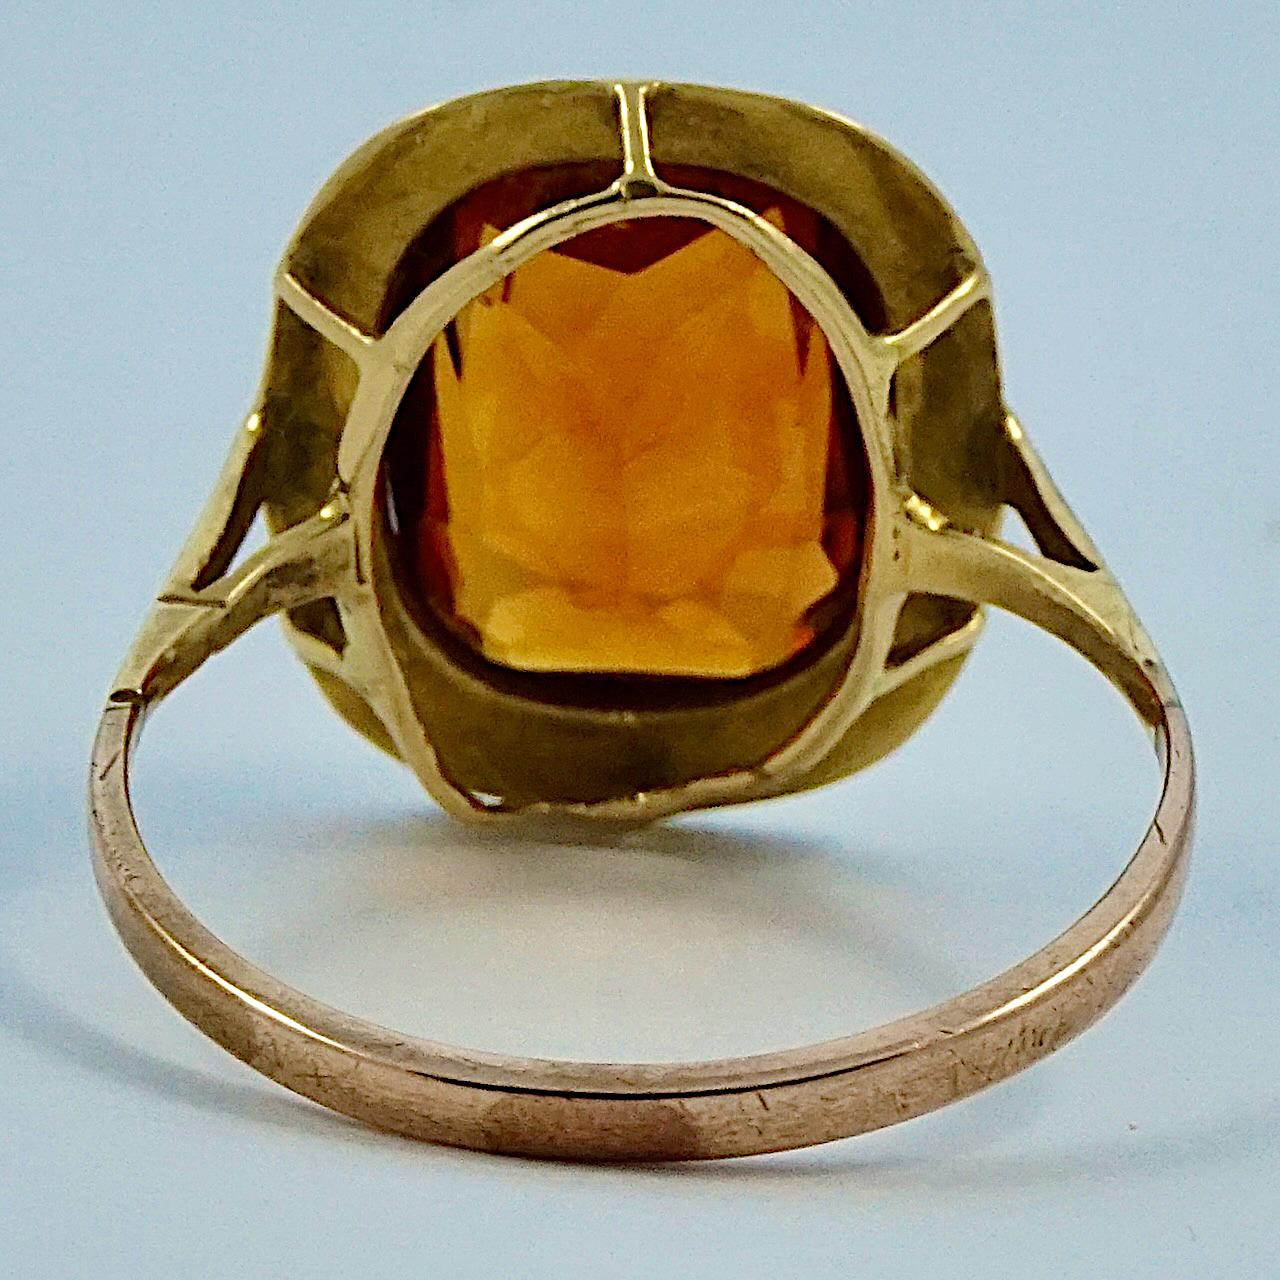 Victorian 18ct yellow gold ring set with a cushion cut citrine, ring size UK N, US 6 1/2. It is unmarked, but tests as 18ct gold. The rose gold band tests as 9ct gold and is probably a replacement band dating to circa 1920s. The citrine is 1.15cm /